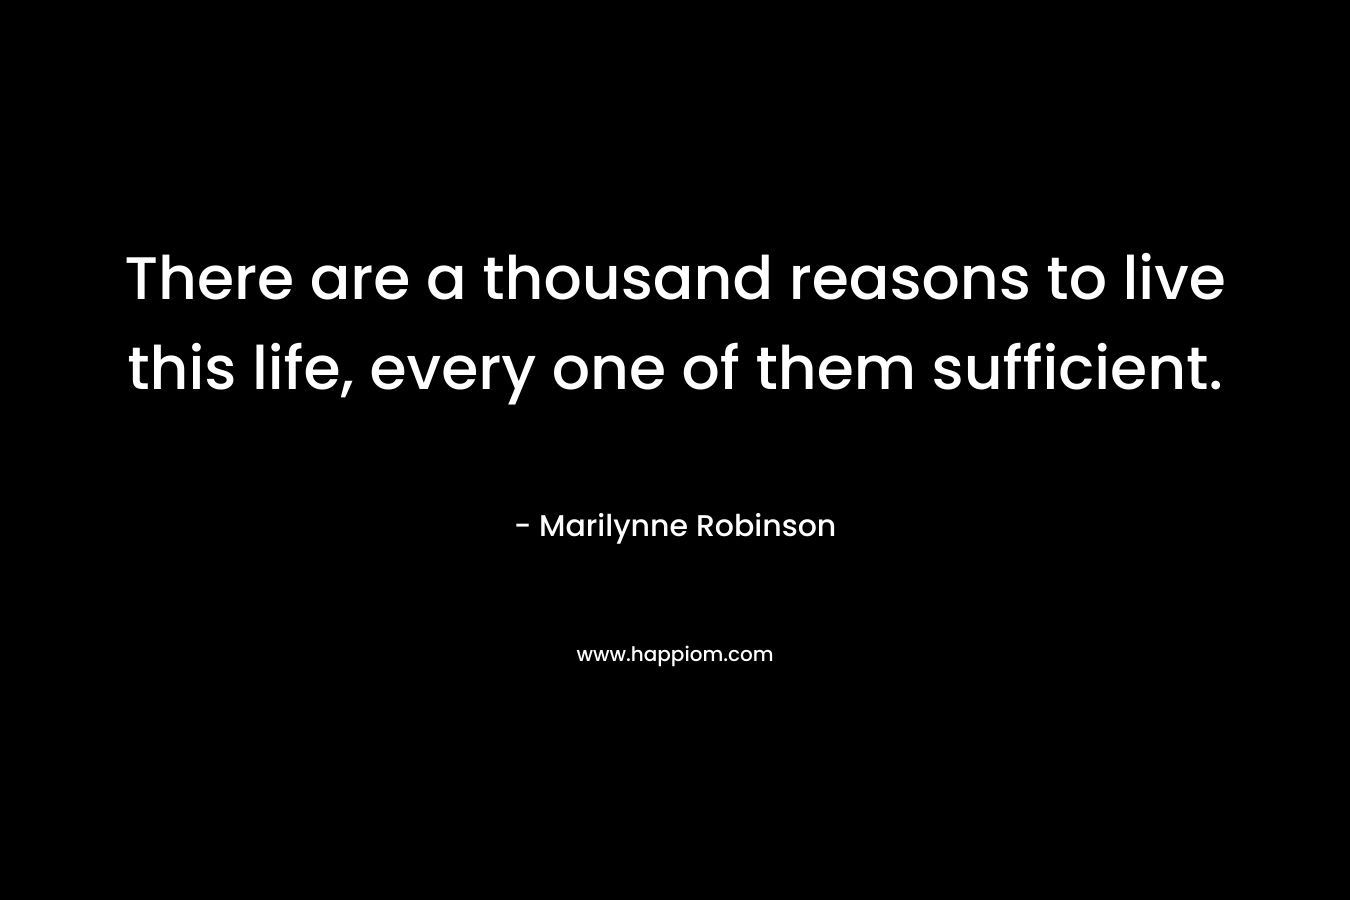 There are a thousand reasons to live this life, every one of them sufficient.